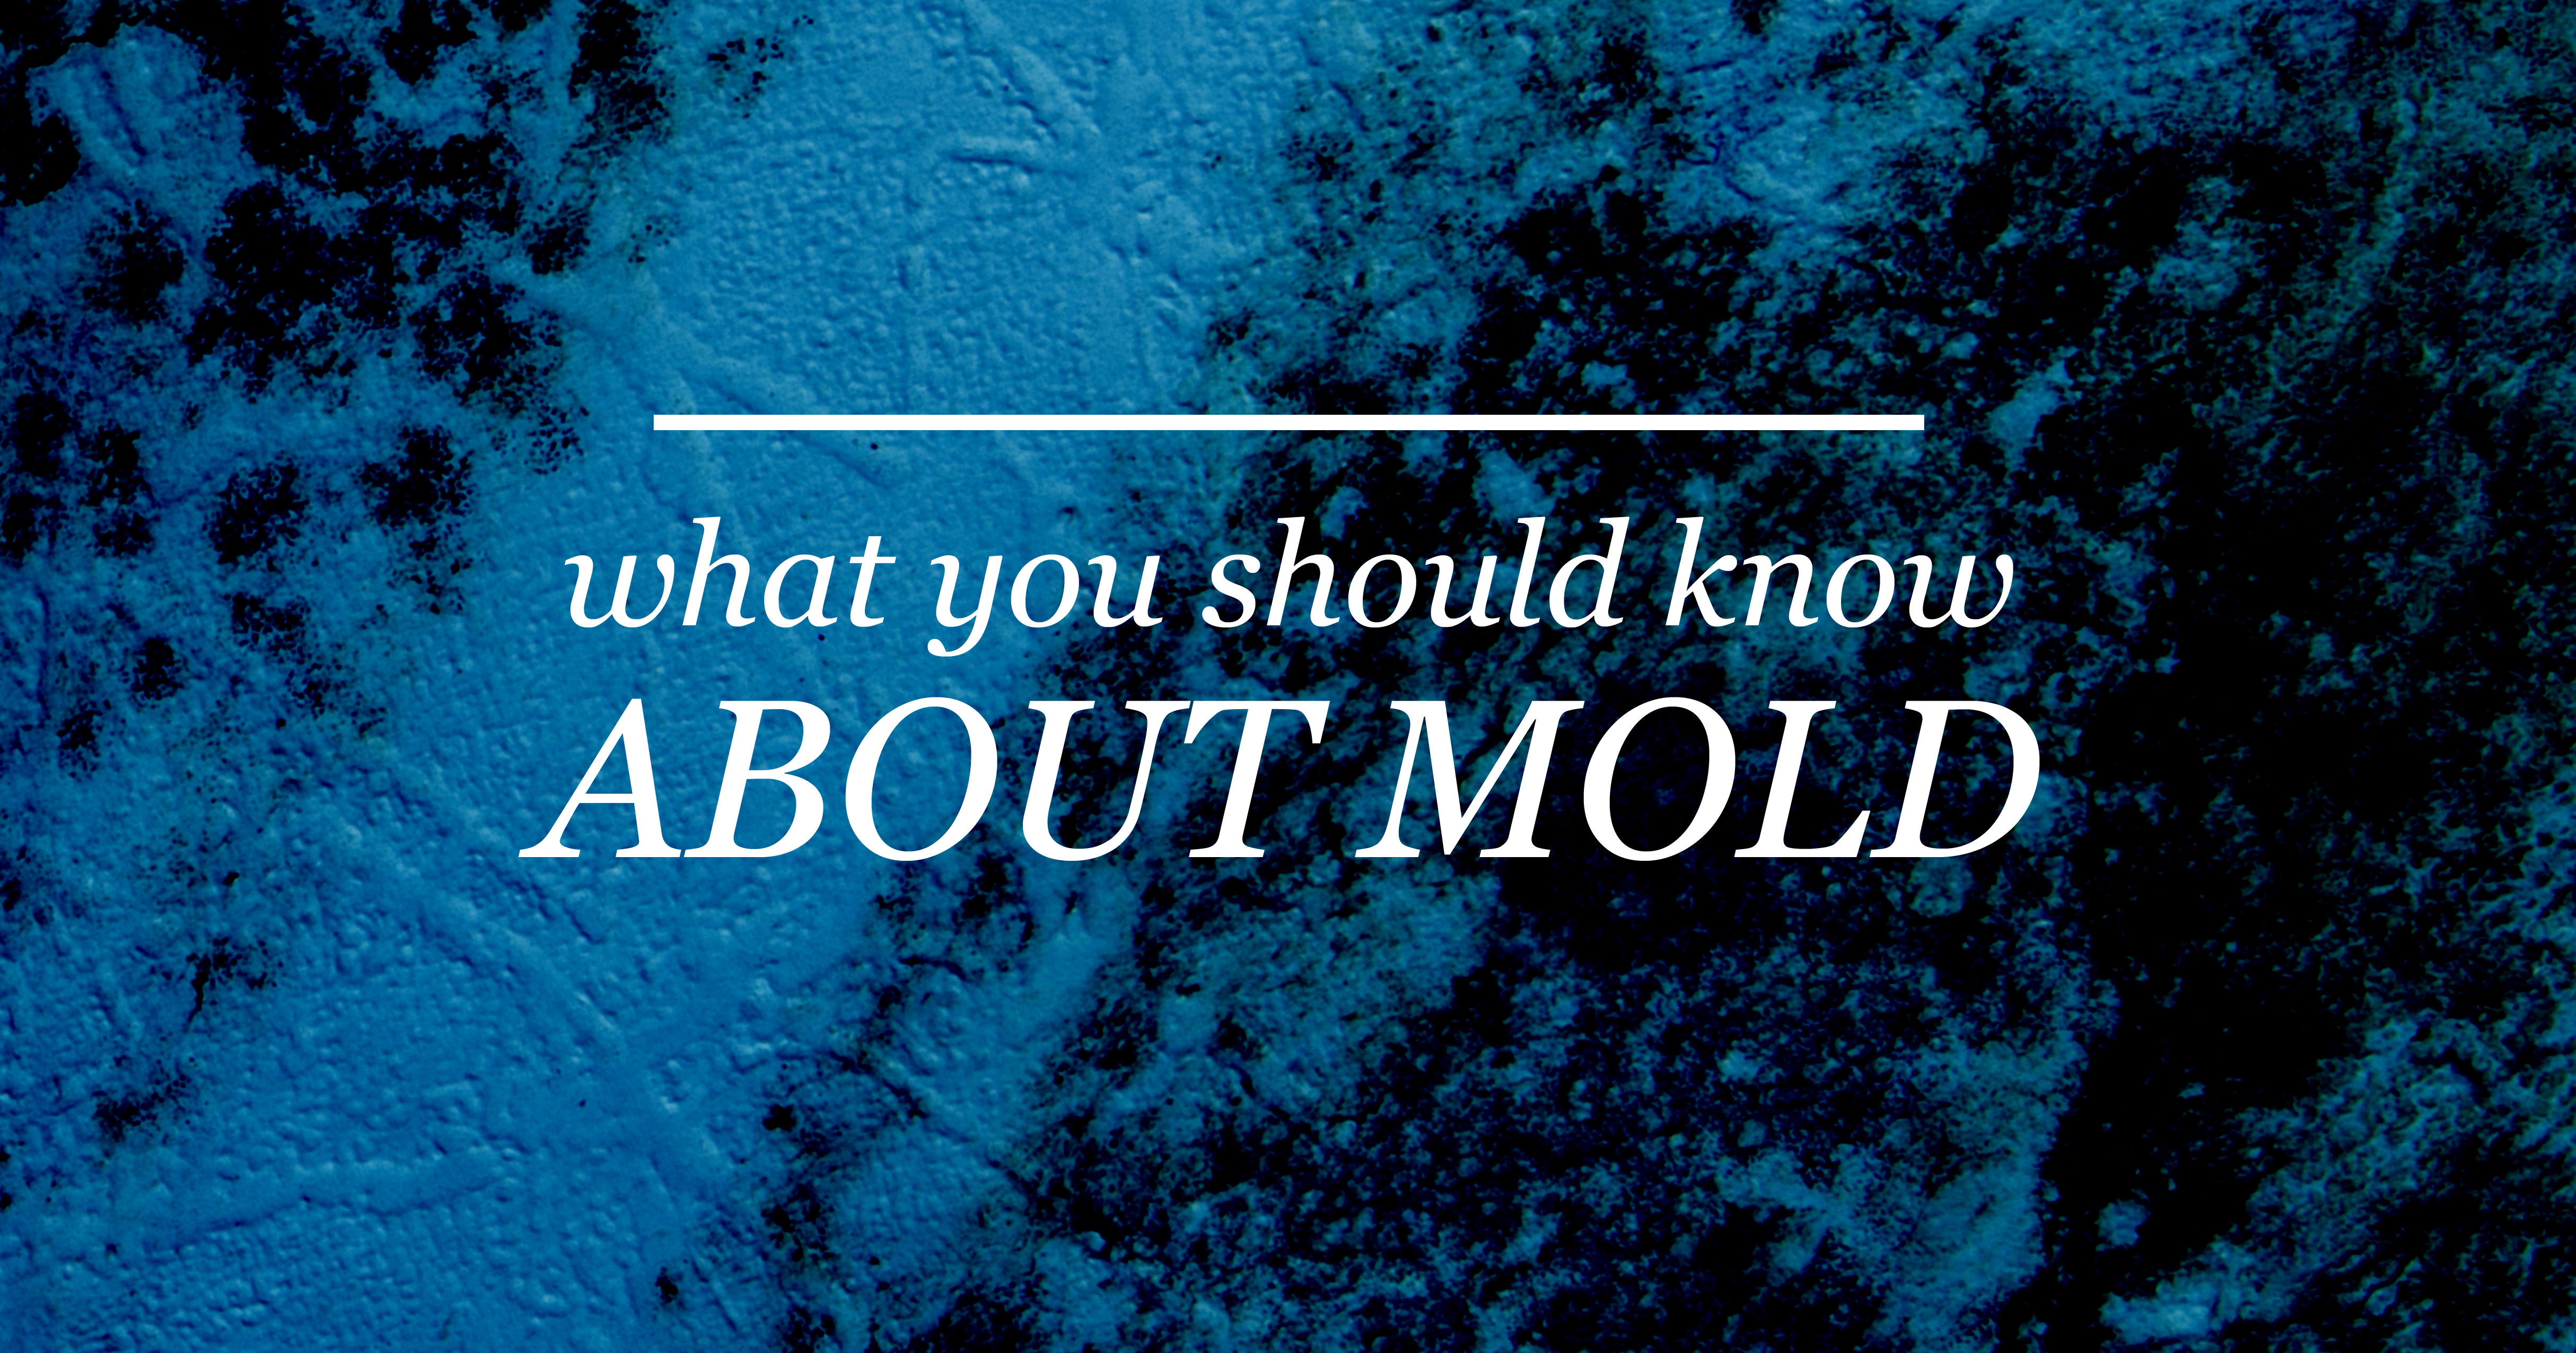 what you should know about mold